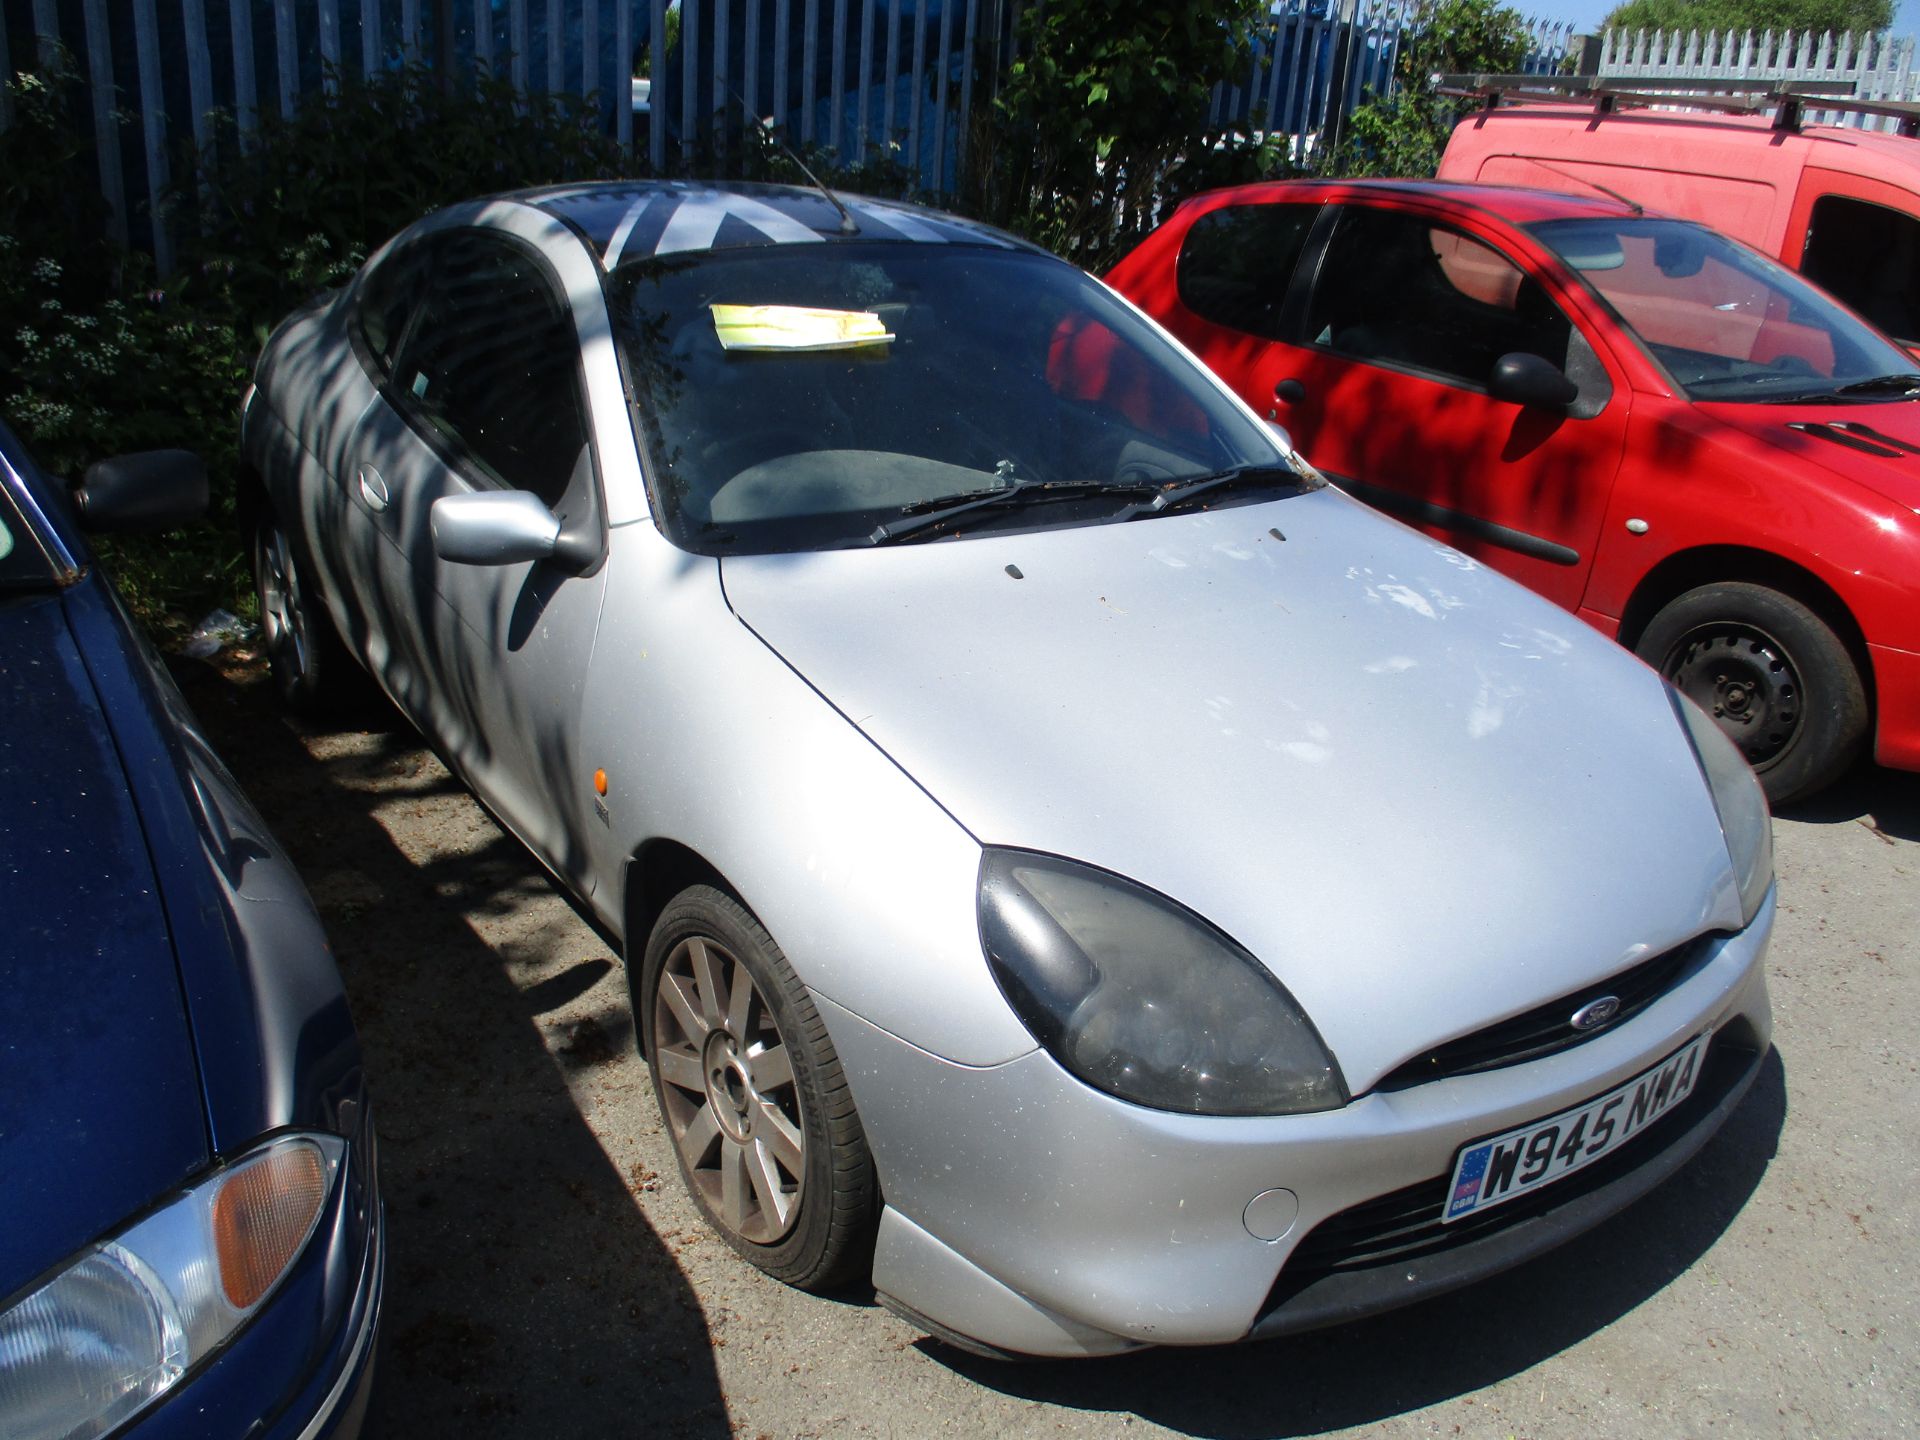 FORD PUMA 1.7L COUPE - petrol - silver - Image 3 of 3